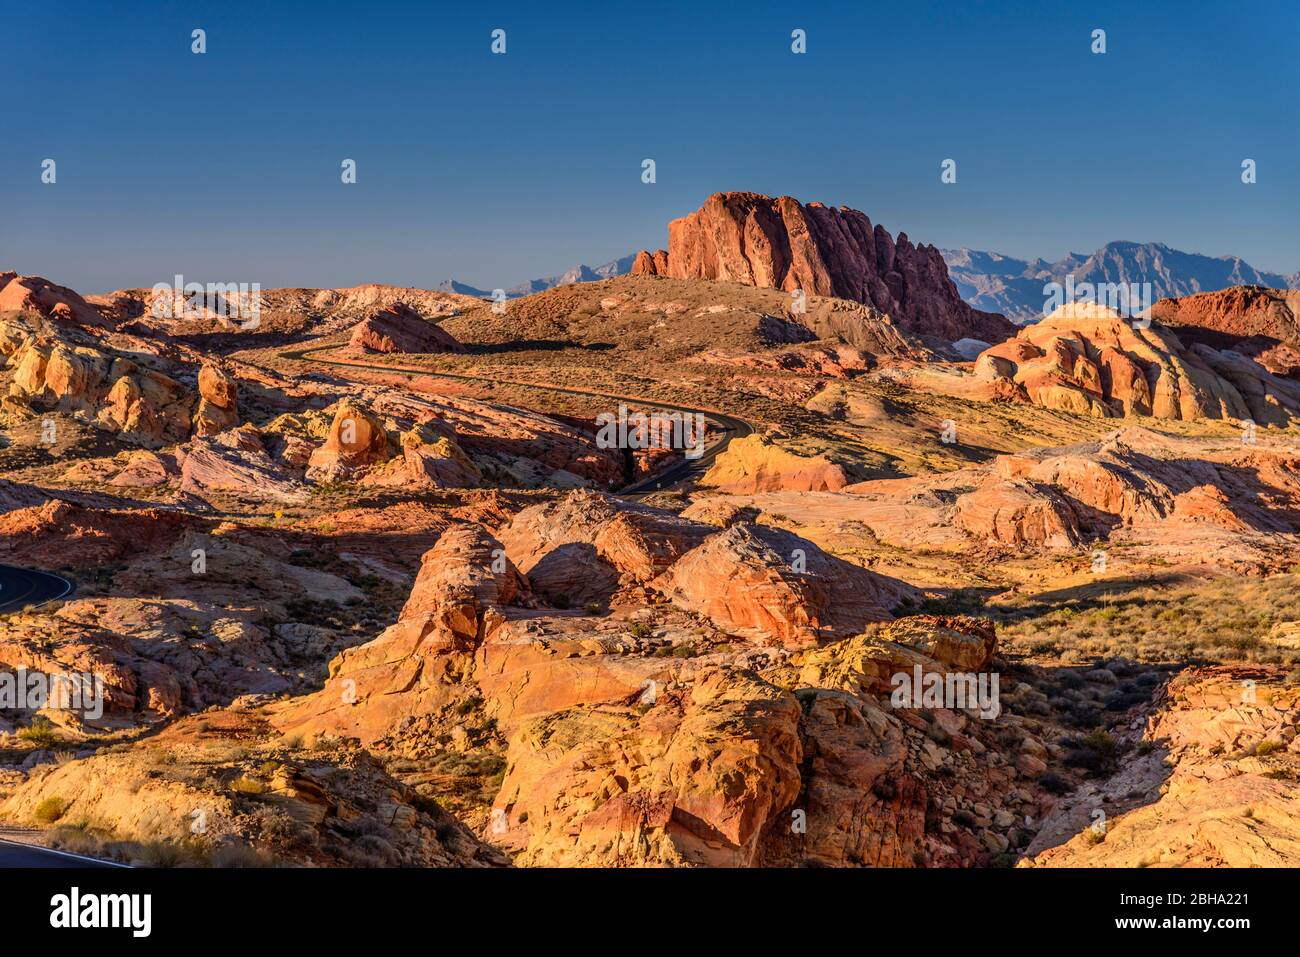 USA, Nevada, Clark County, Overton, Valley of Fire state Park, White Domes Scenic Byway mit Gibraltar Rock Foto Stock